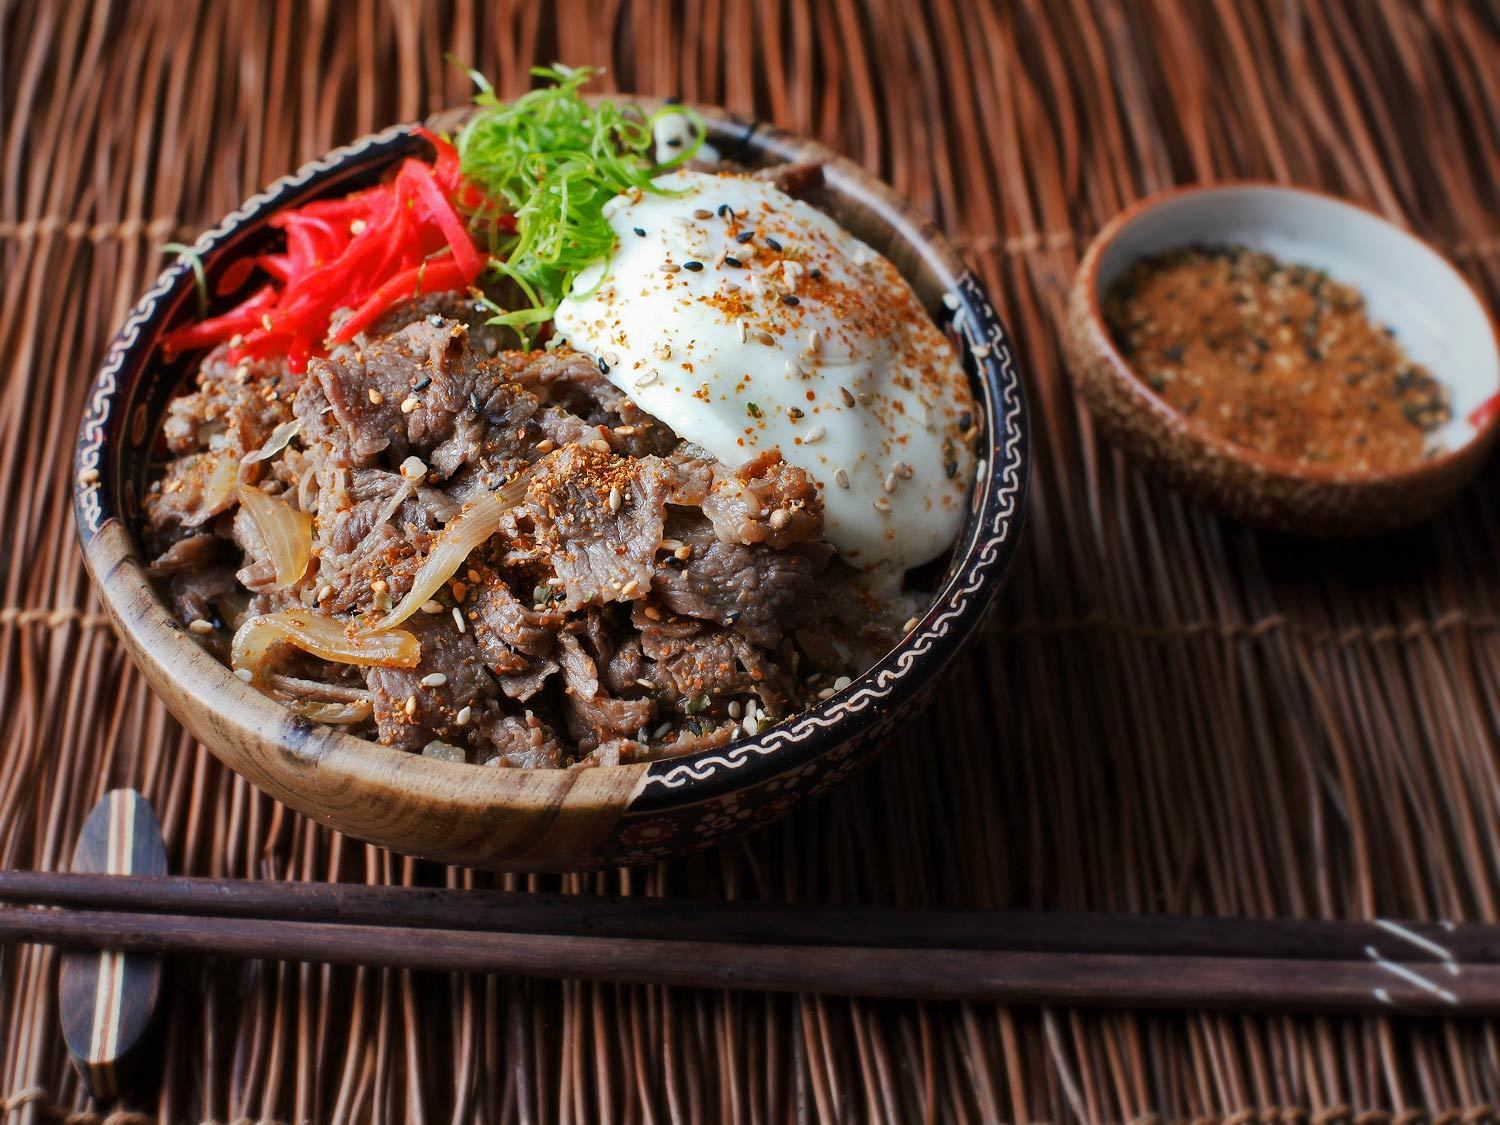 Gyudon (Japanese Simmered Beef and Rice Bowls) - Best dinner recipe